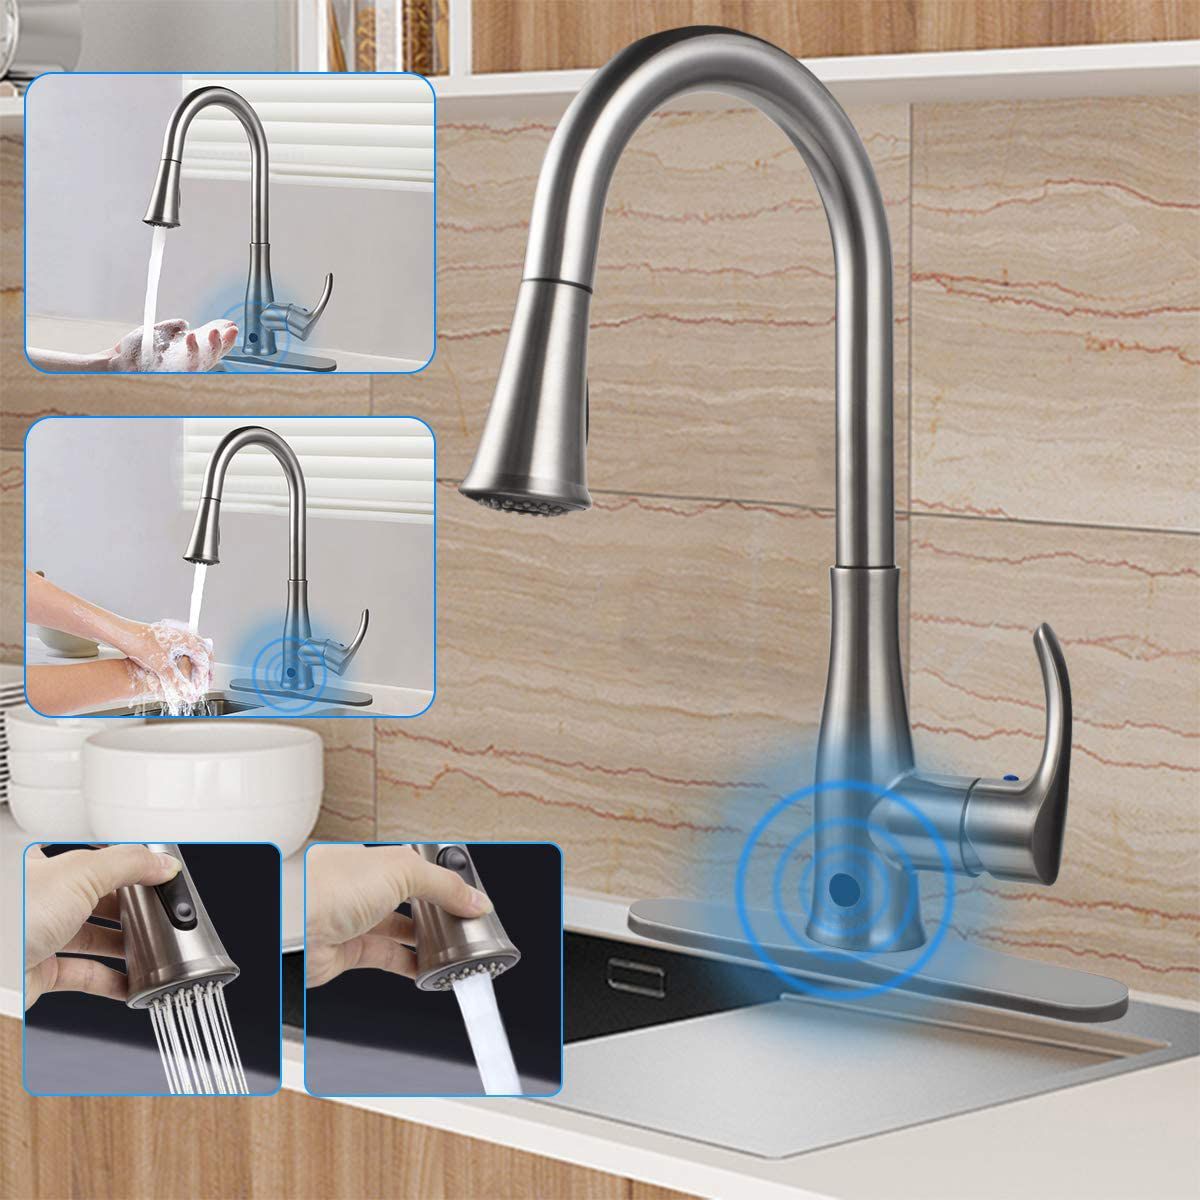 Aquacubic US Standard Sensor Infrared Smart Touchless Hand Free Two Motion Kitchen Sink Faucet